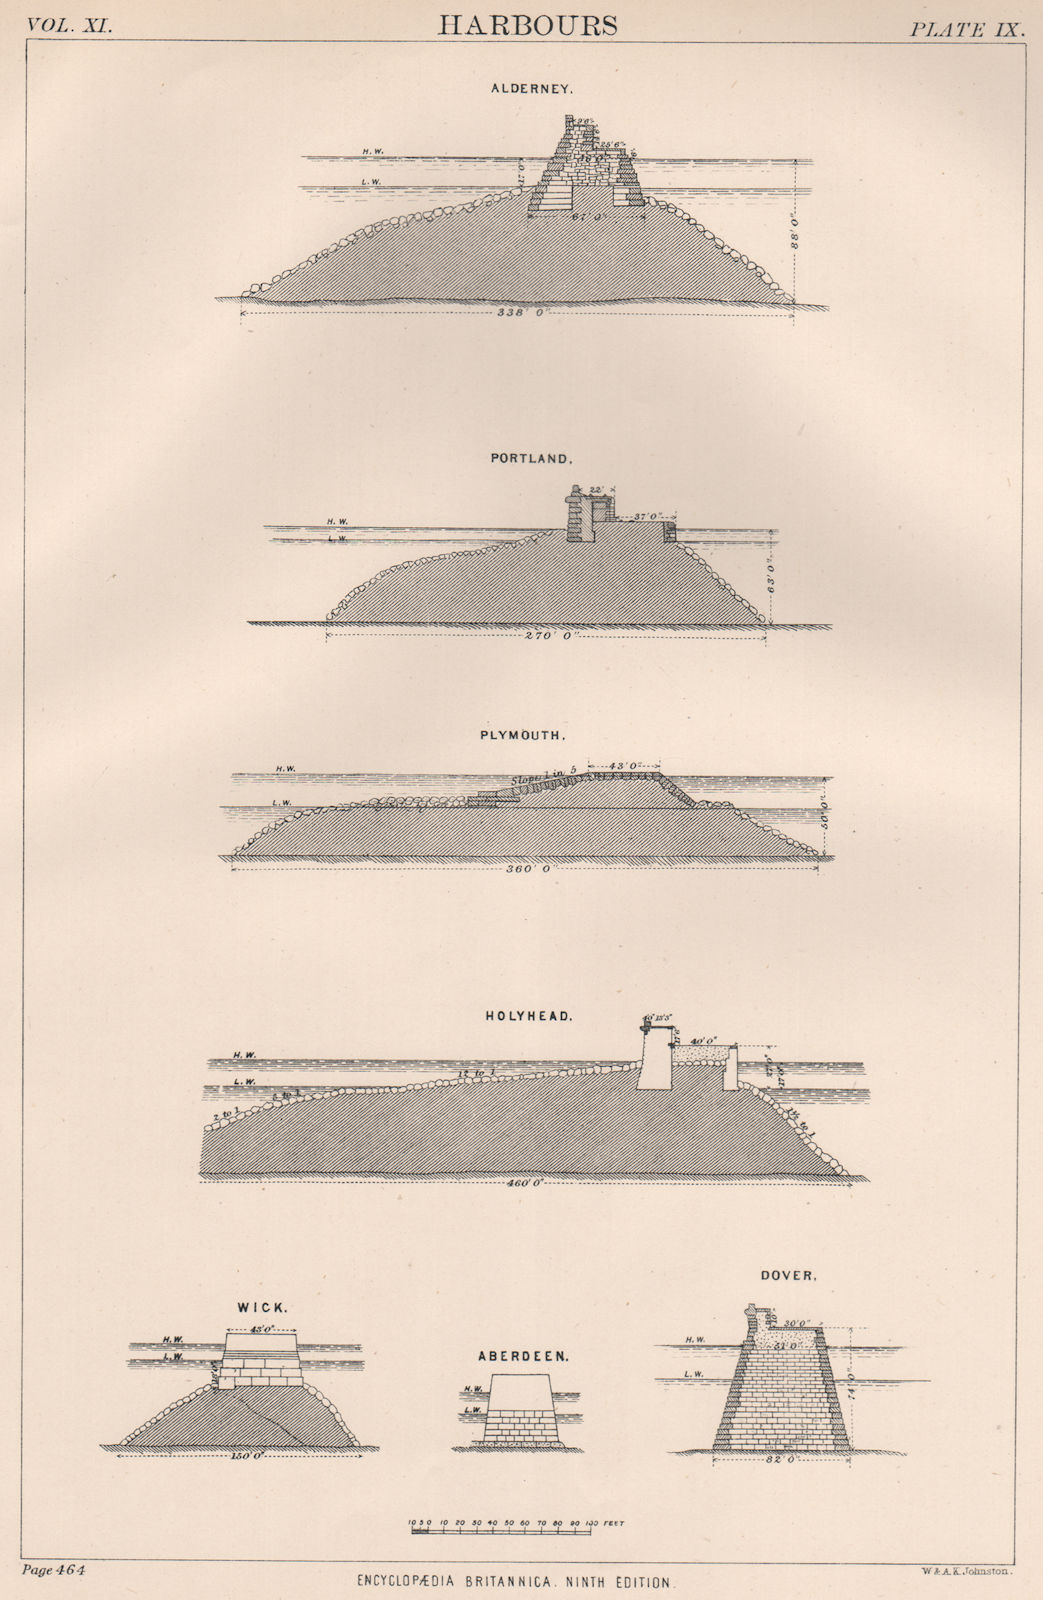 Associate Product HARBOURS. Alderney Portland Plymouth Holyhead Wick Aberdeen Dover 1898 print